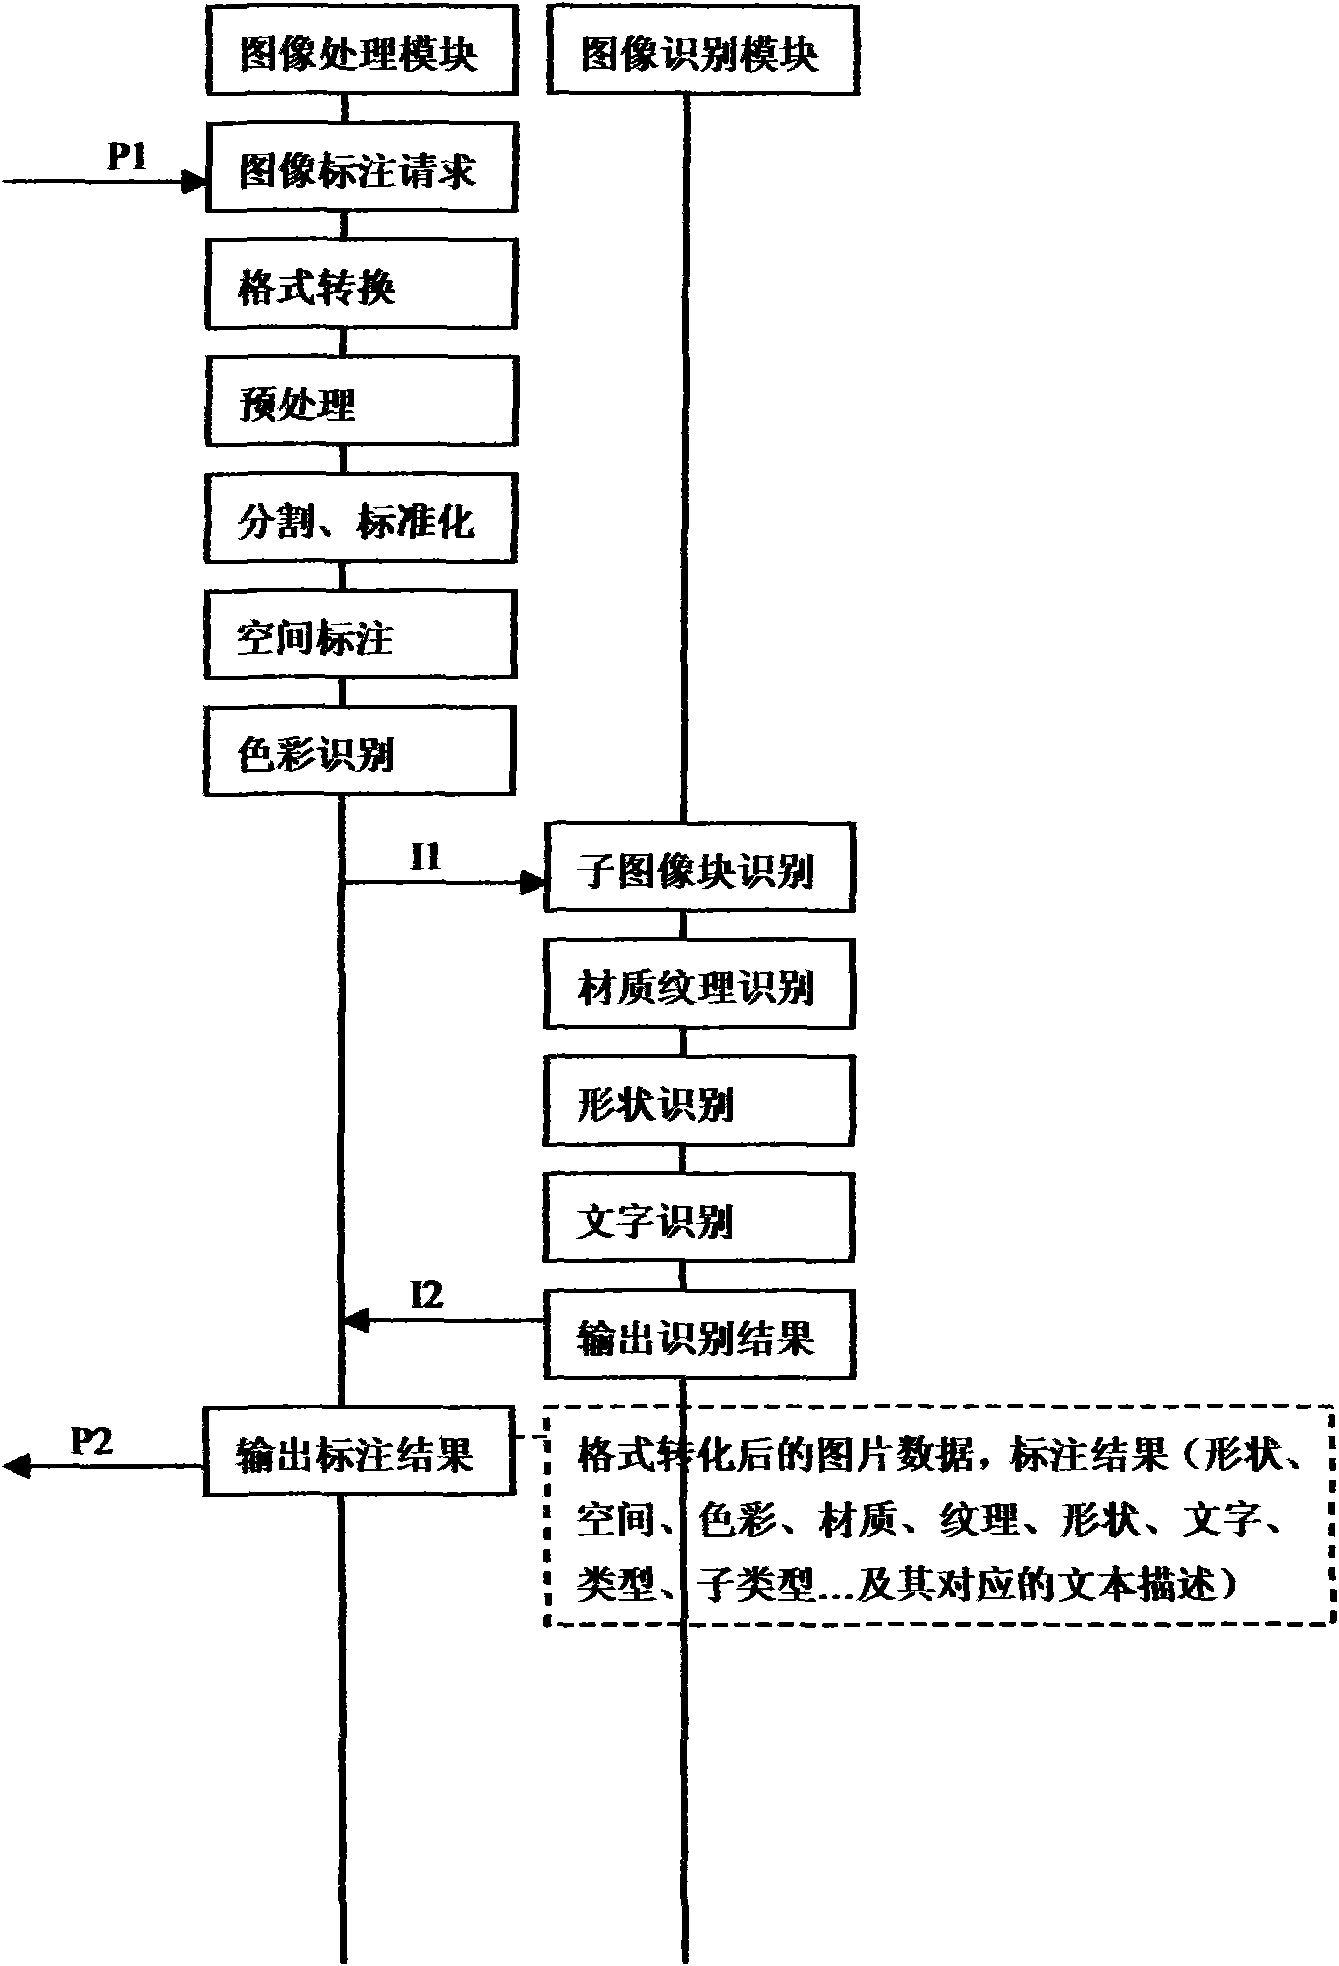 Realization method of image searching system based on image recognition